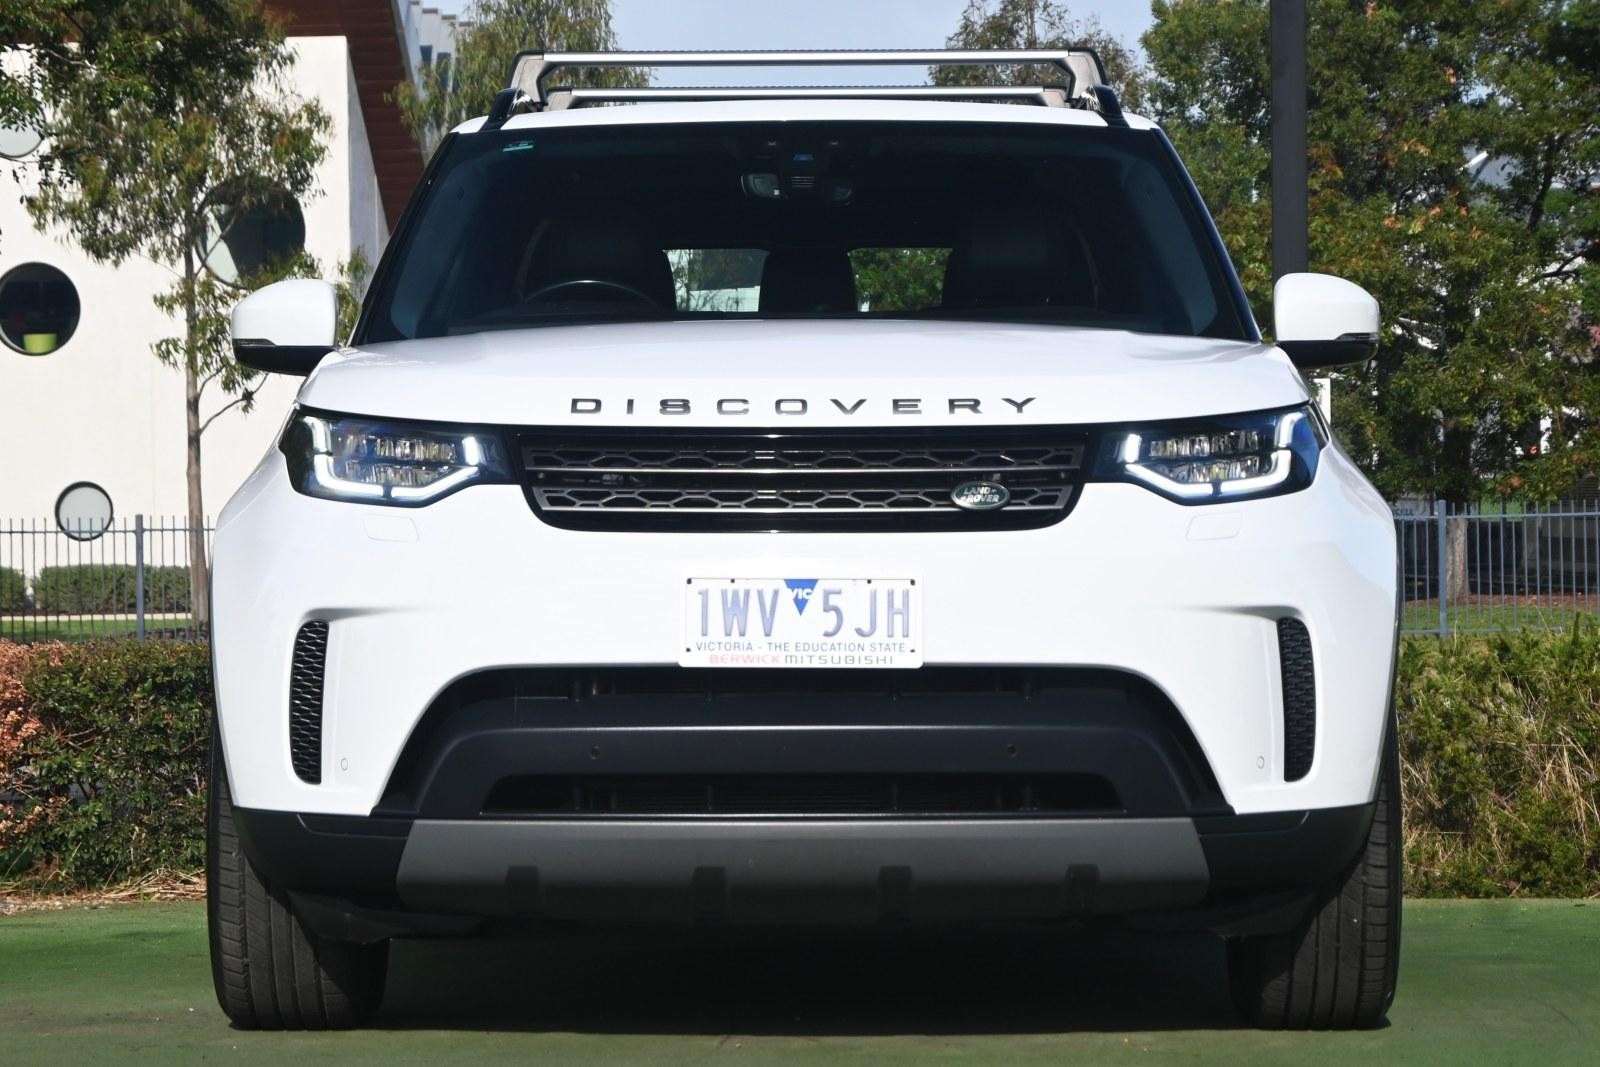 Land Rover Discovery image 2